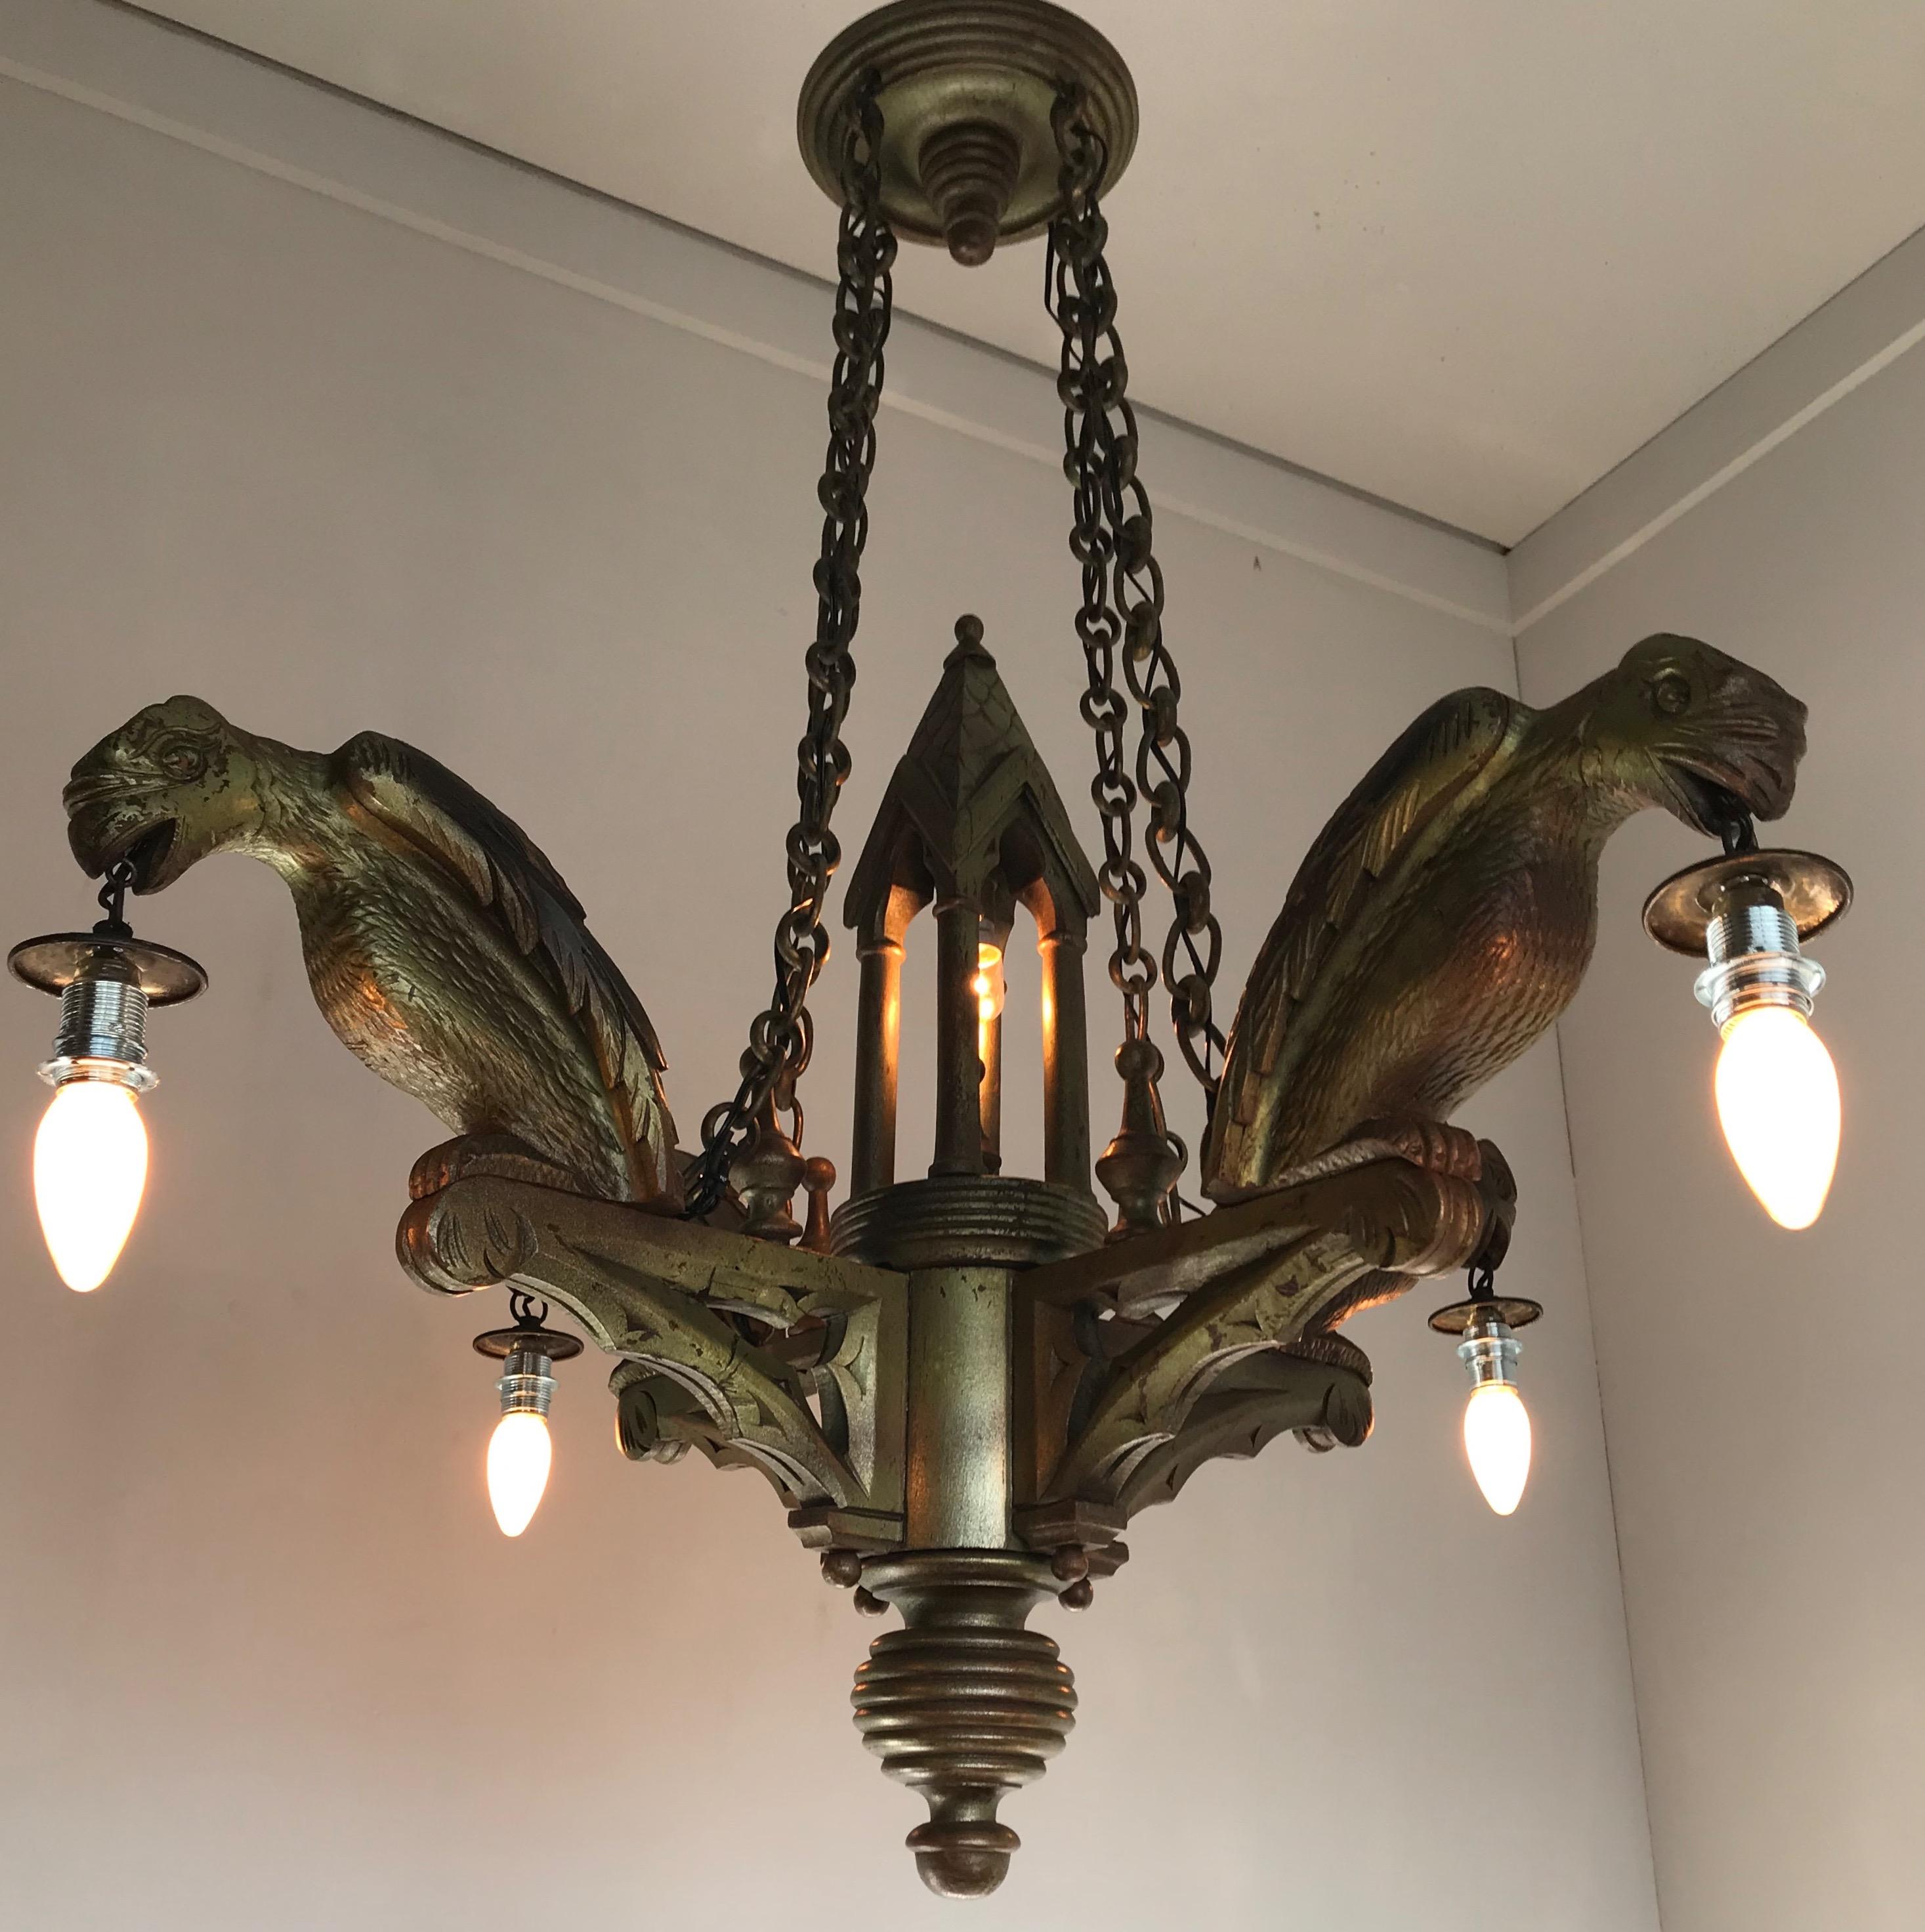 Rare Hand Carved Wooden Gothic Revival Art Chandelier with Gargoyle Sculptures For Sale 9